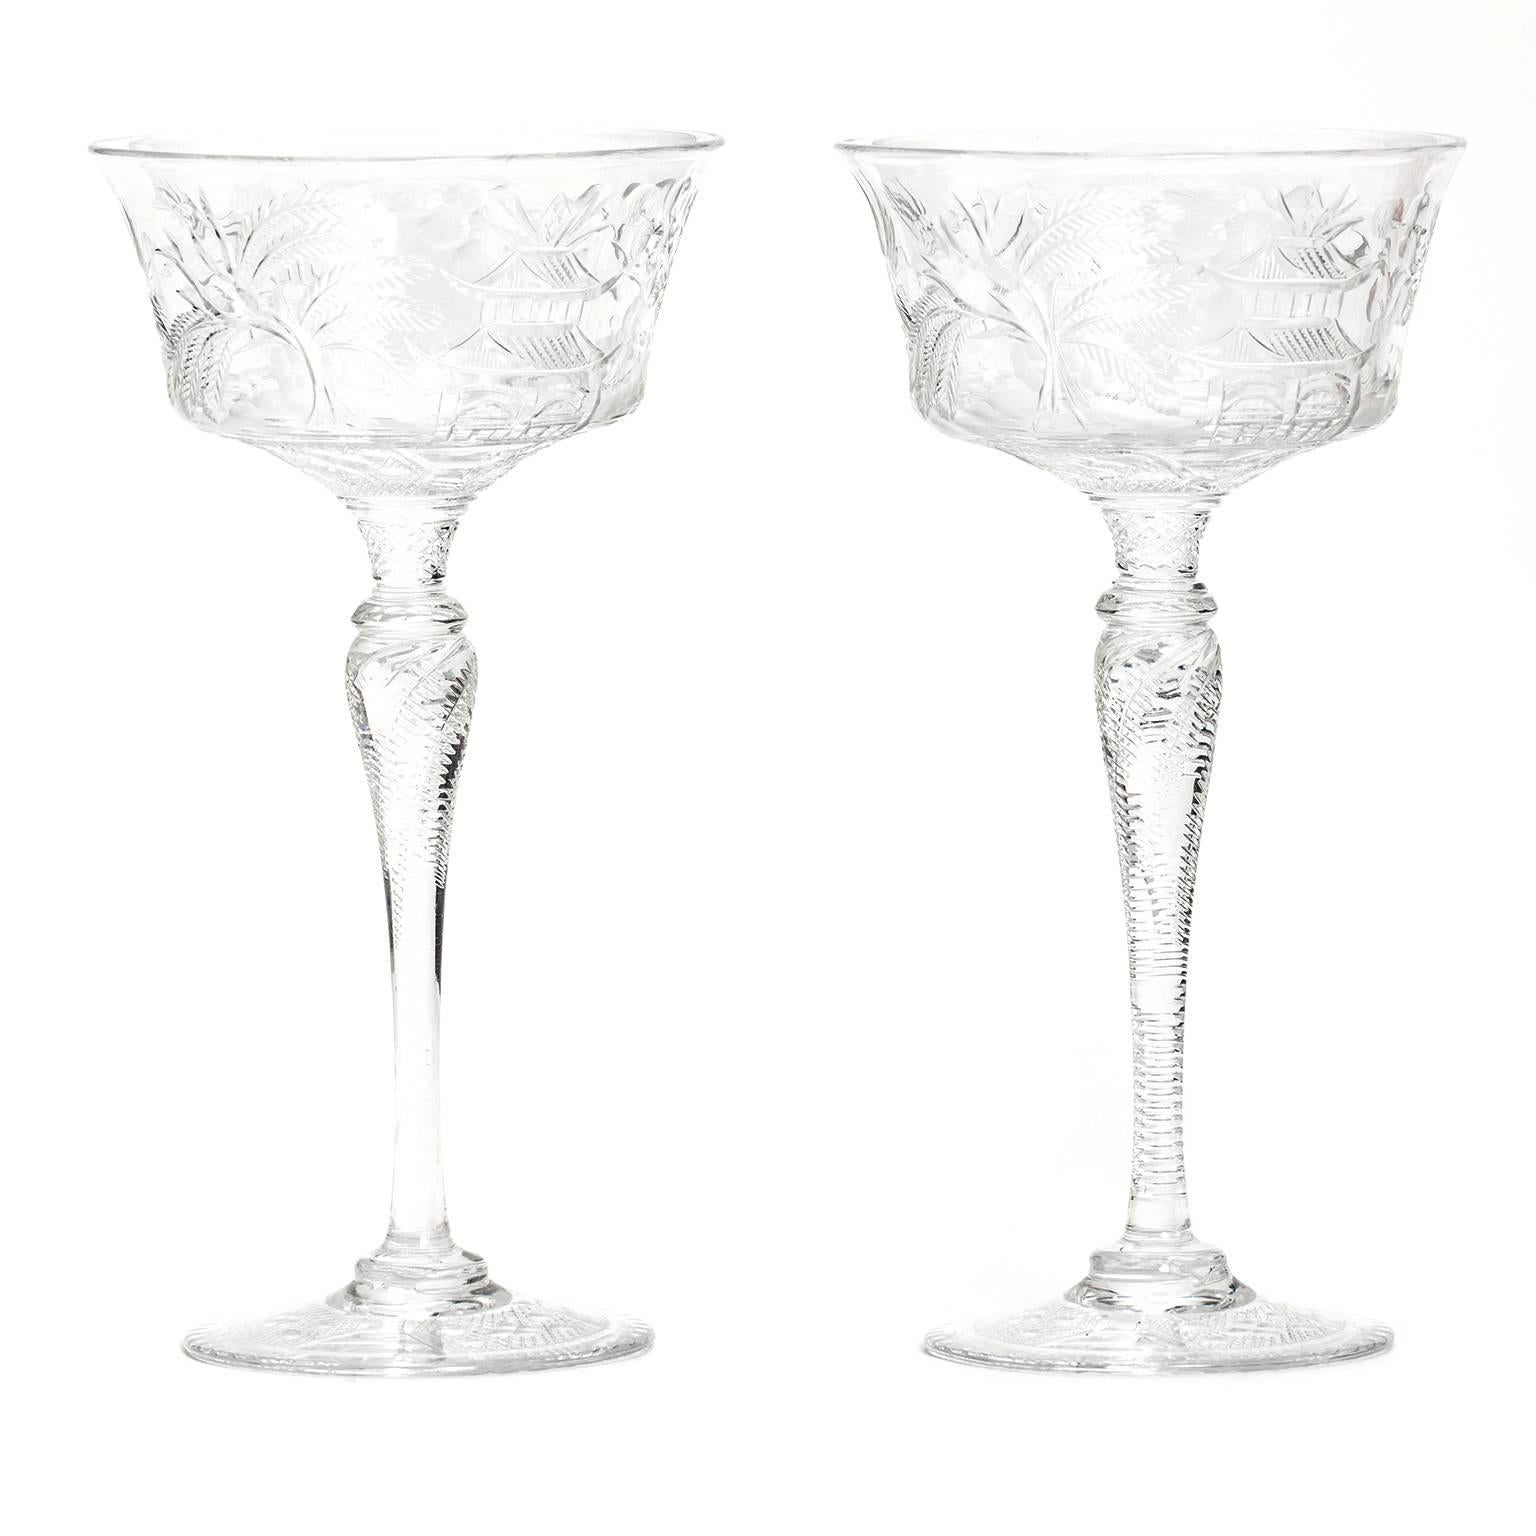 Circa 1910, Stevens & Williams, England. These outstanding champagne or cocktail glasses by Stevens and Williams, in the rare and desirable “Willow” pattern, are ornamented with a beautiful chinoiserie scene featuring pagodas and ships. Splendidly